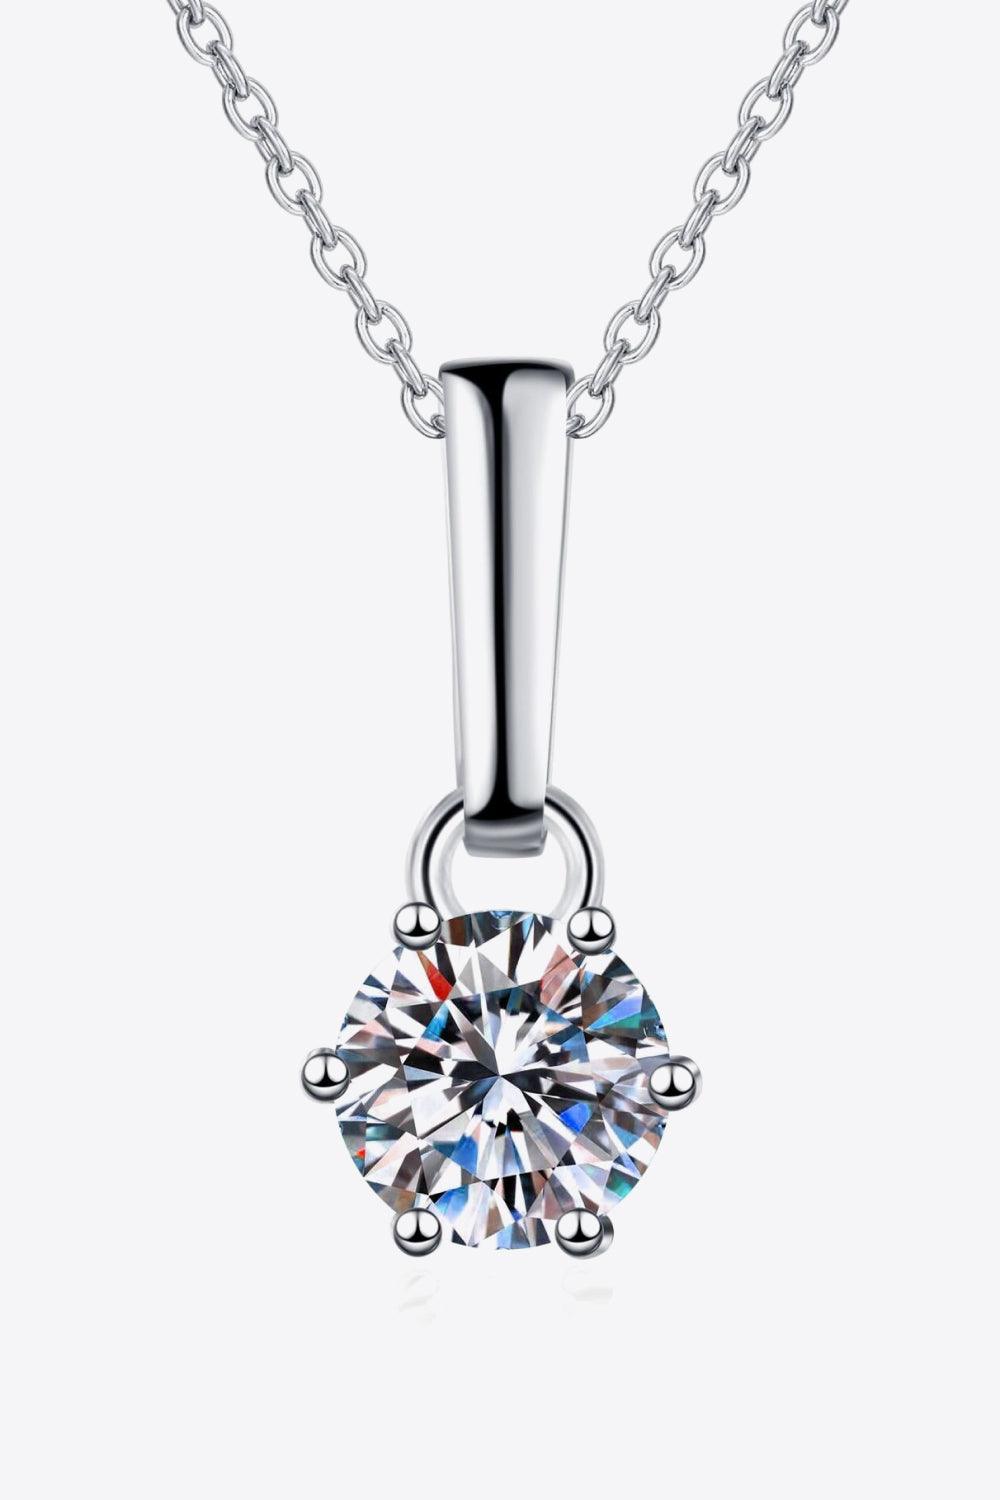 1 Carat Moissanite 925 Sterling Silver Chain-Link Necklace - Trendha